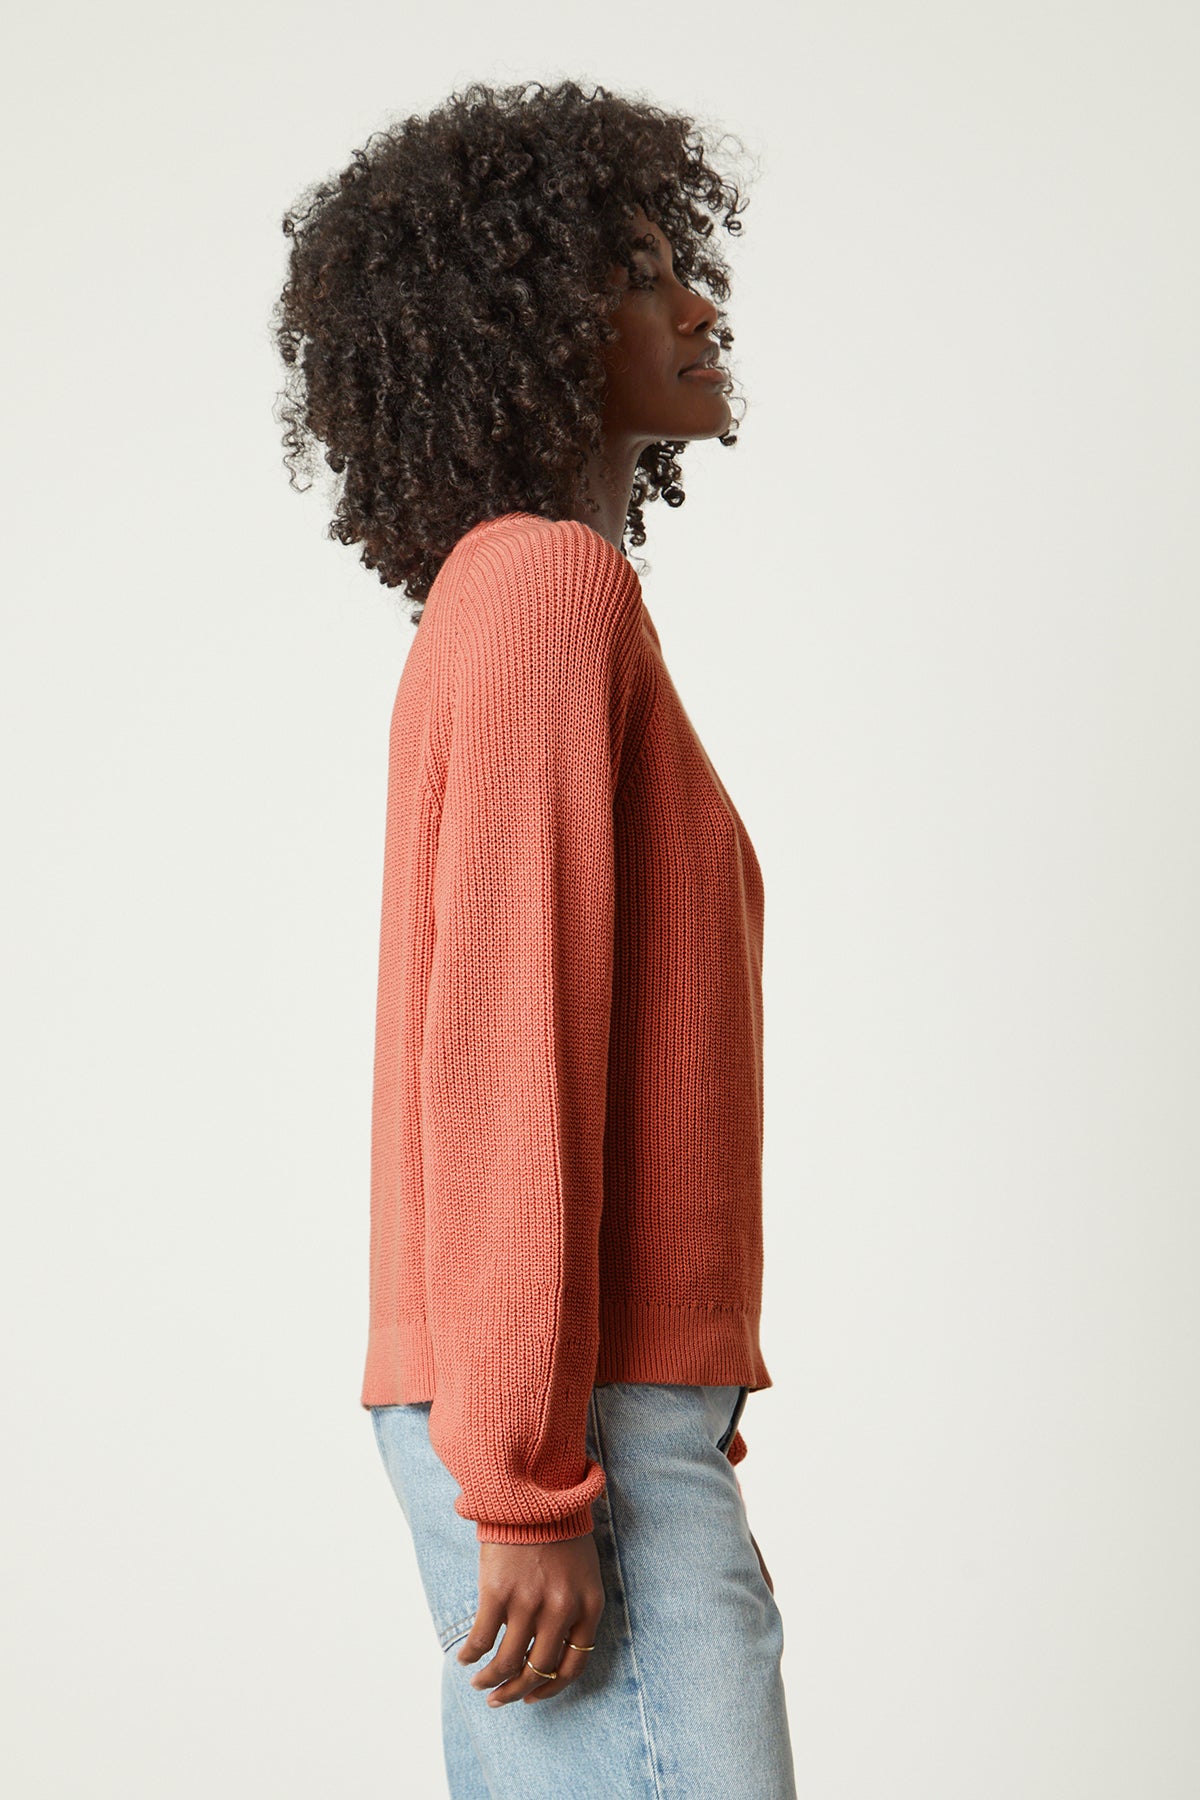   The back view of a woman wearing the Velvet by Graham & Spencer LINAH CREW NECK SWEATER and jeans. 